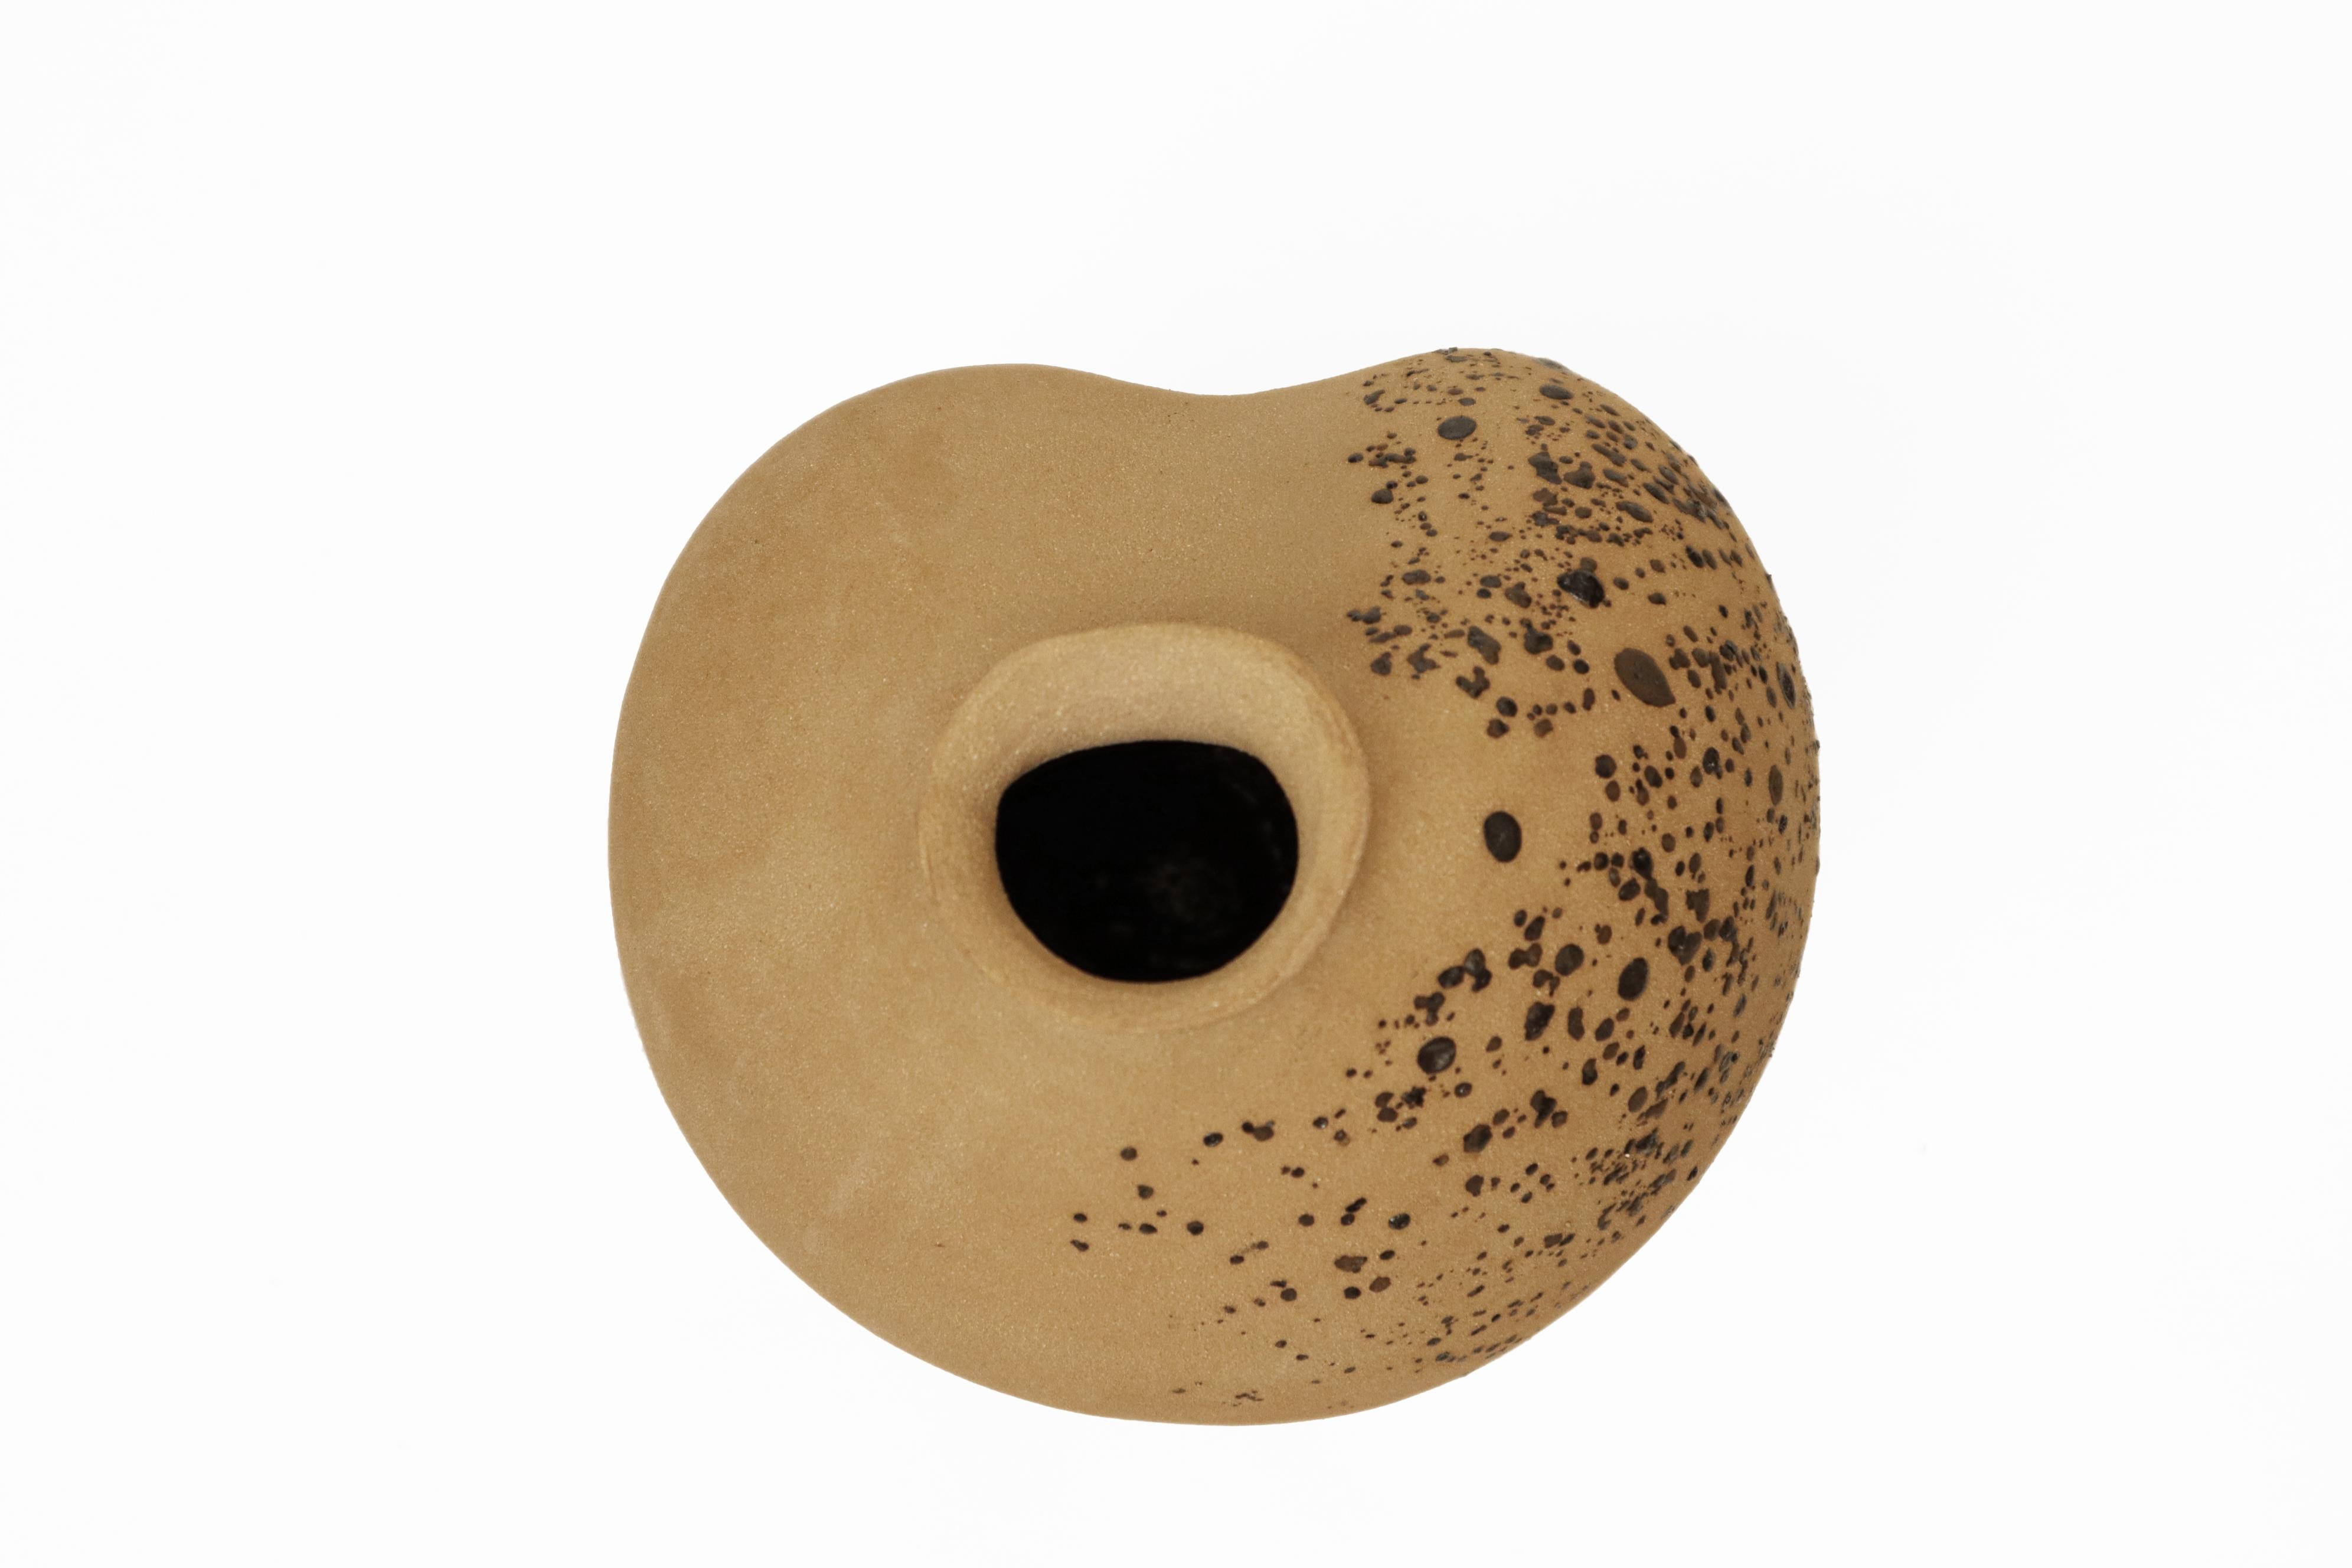 Stomata 14 vase by Anna Karountzou
Dimensions: W 22 x D 24 x H 34.5 cm
Materials: Beige stoneware clay, clear glaze inside, decorated outside with volcano rocks collected from Santorini, fired at 1240

Born and based in Athens, Greece, with a